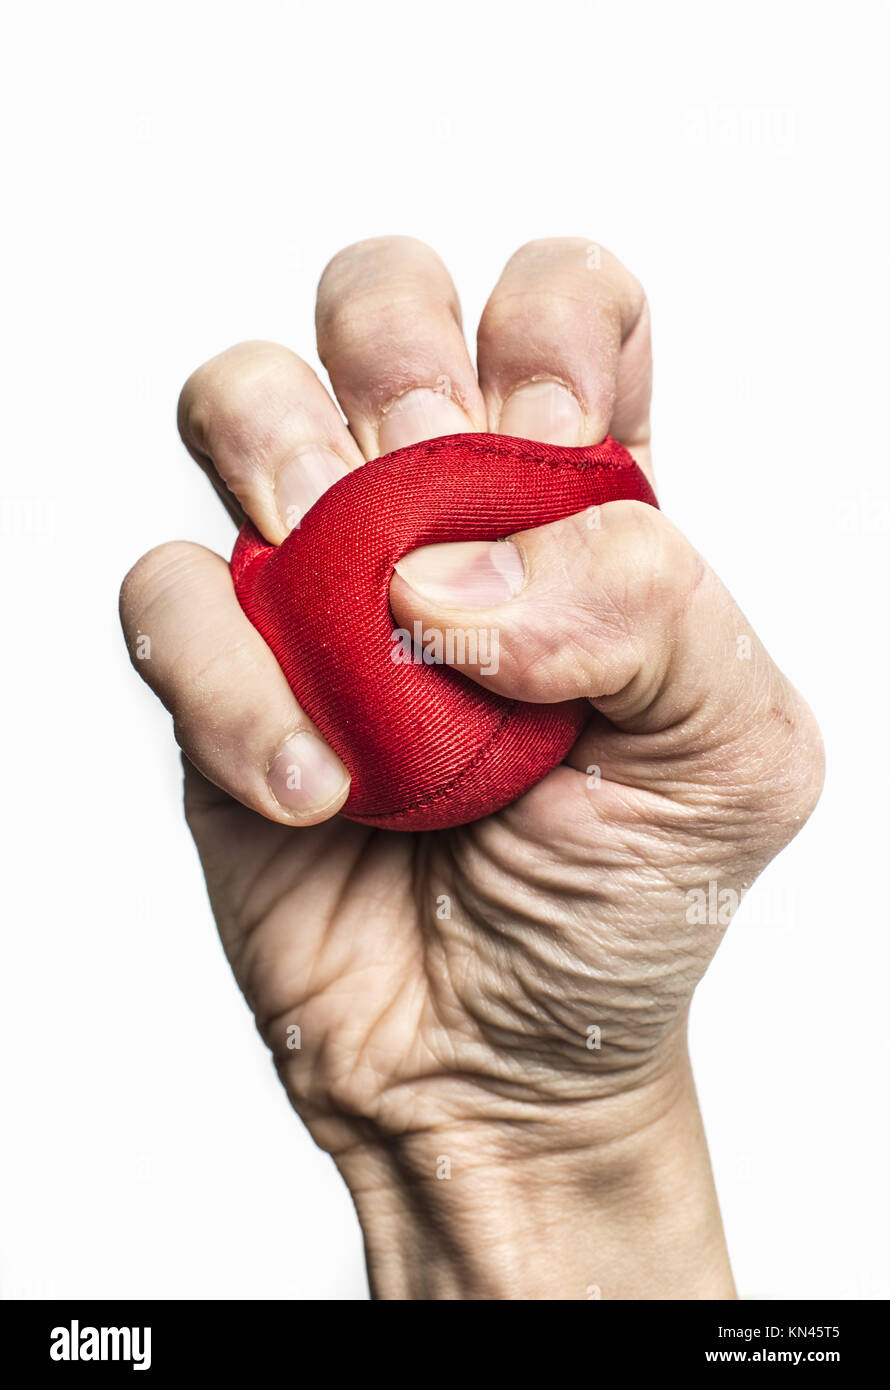 Human fist squeezing red stress ball. Symbol of anxiety, frustration and pressure at work. Stock Photo